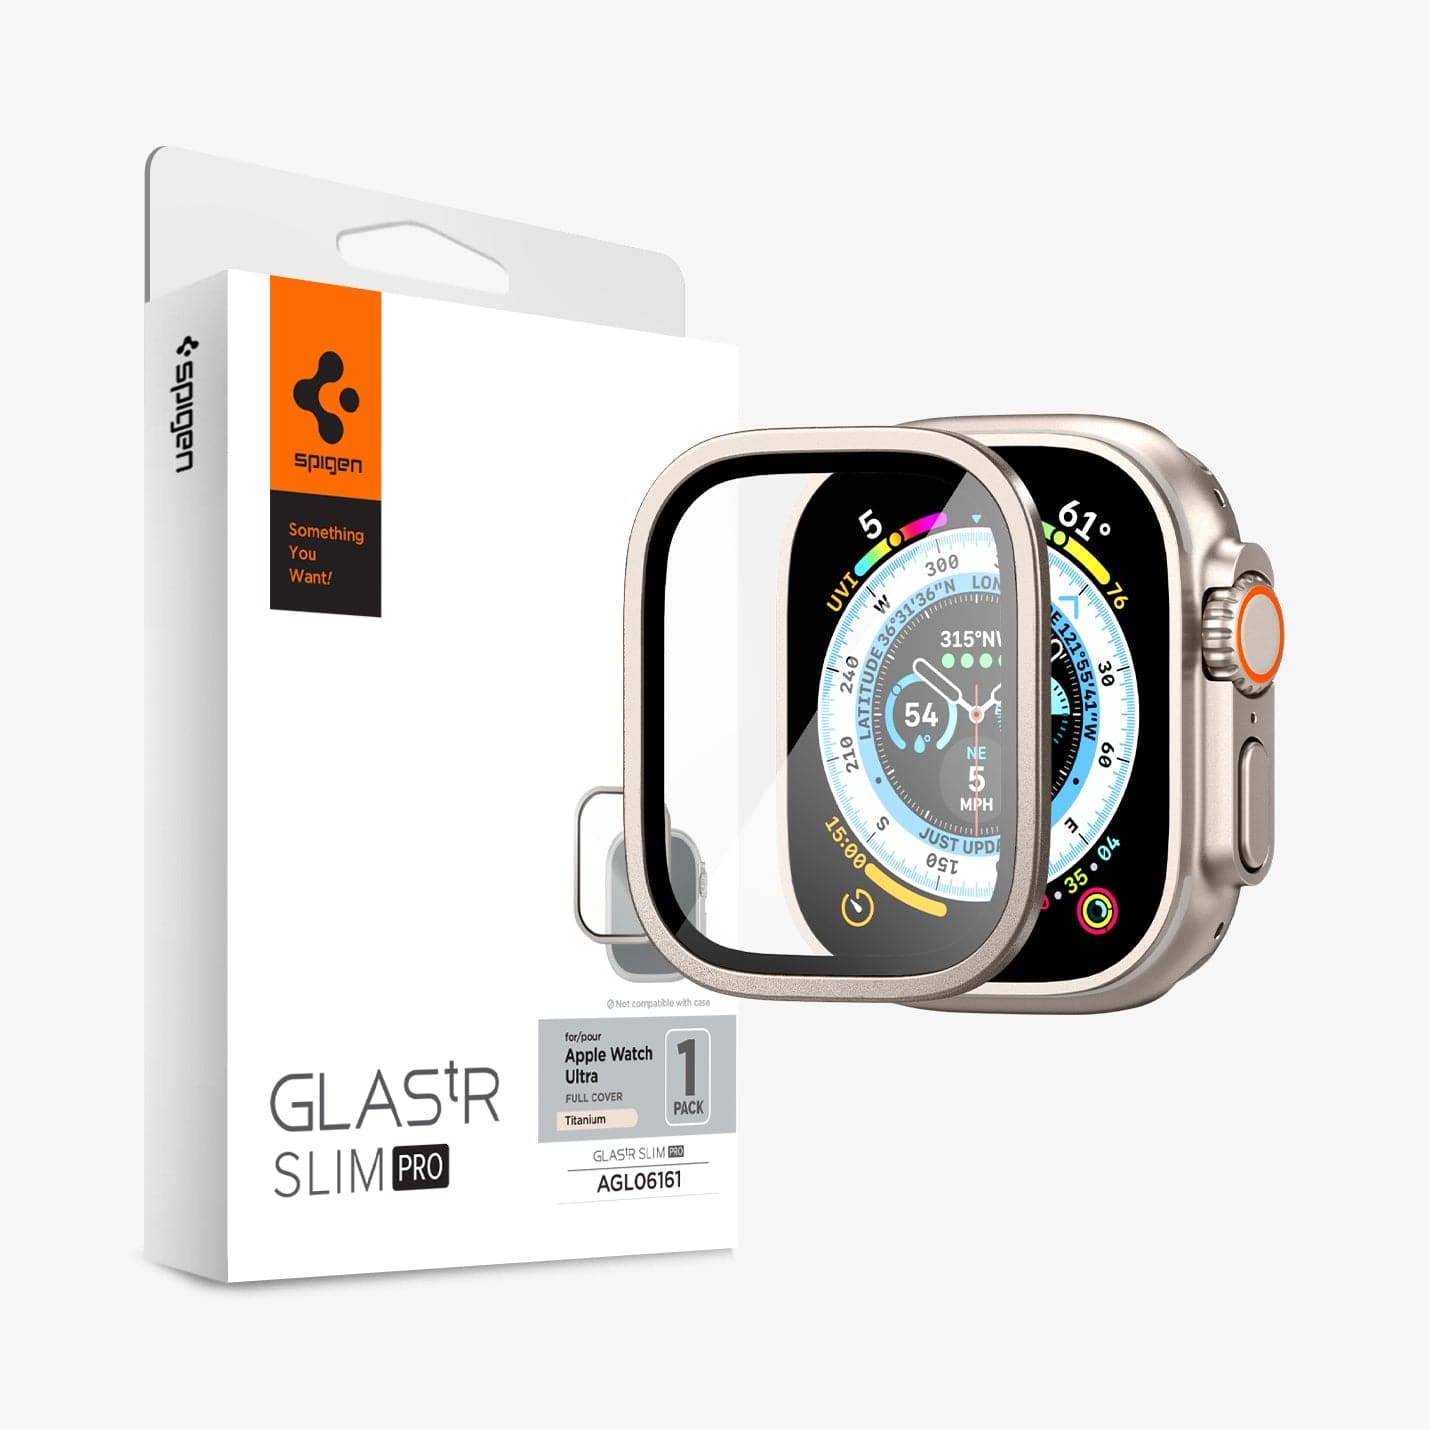 AGL06161 - Apple Watch Ultra (Apple Watch (49mm)) Screen Protector Glas.tR Slim Pro in titanium showing the screen protector, watch face and packaging